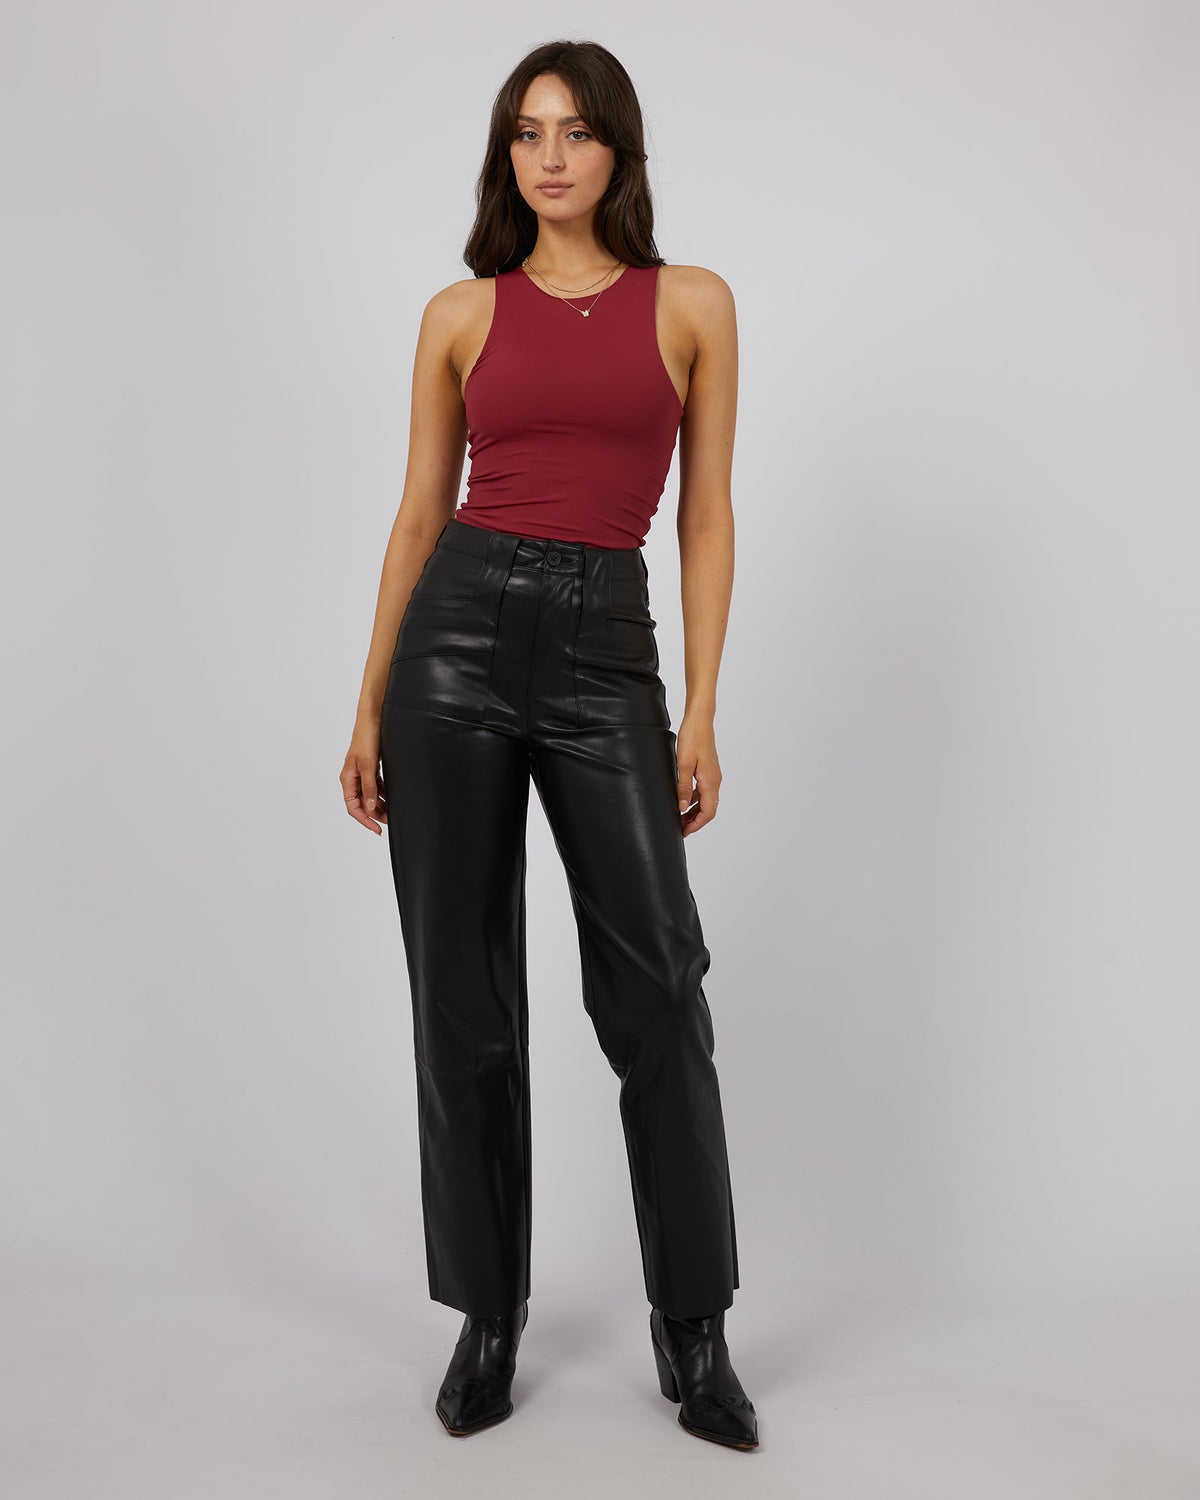 All About Eve-Eve Staple Bodysuit Port-Edge Clothing